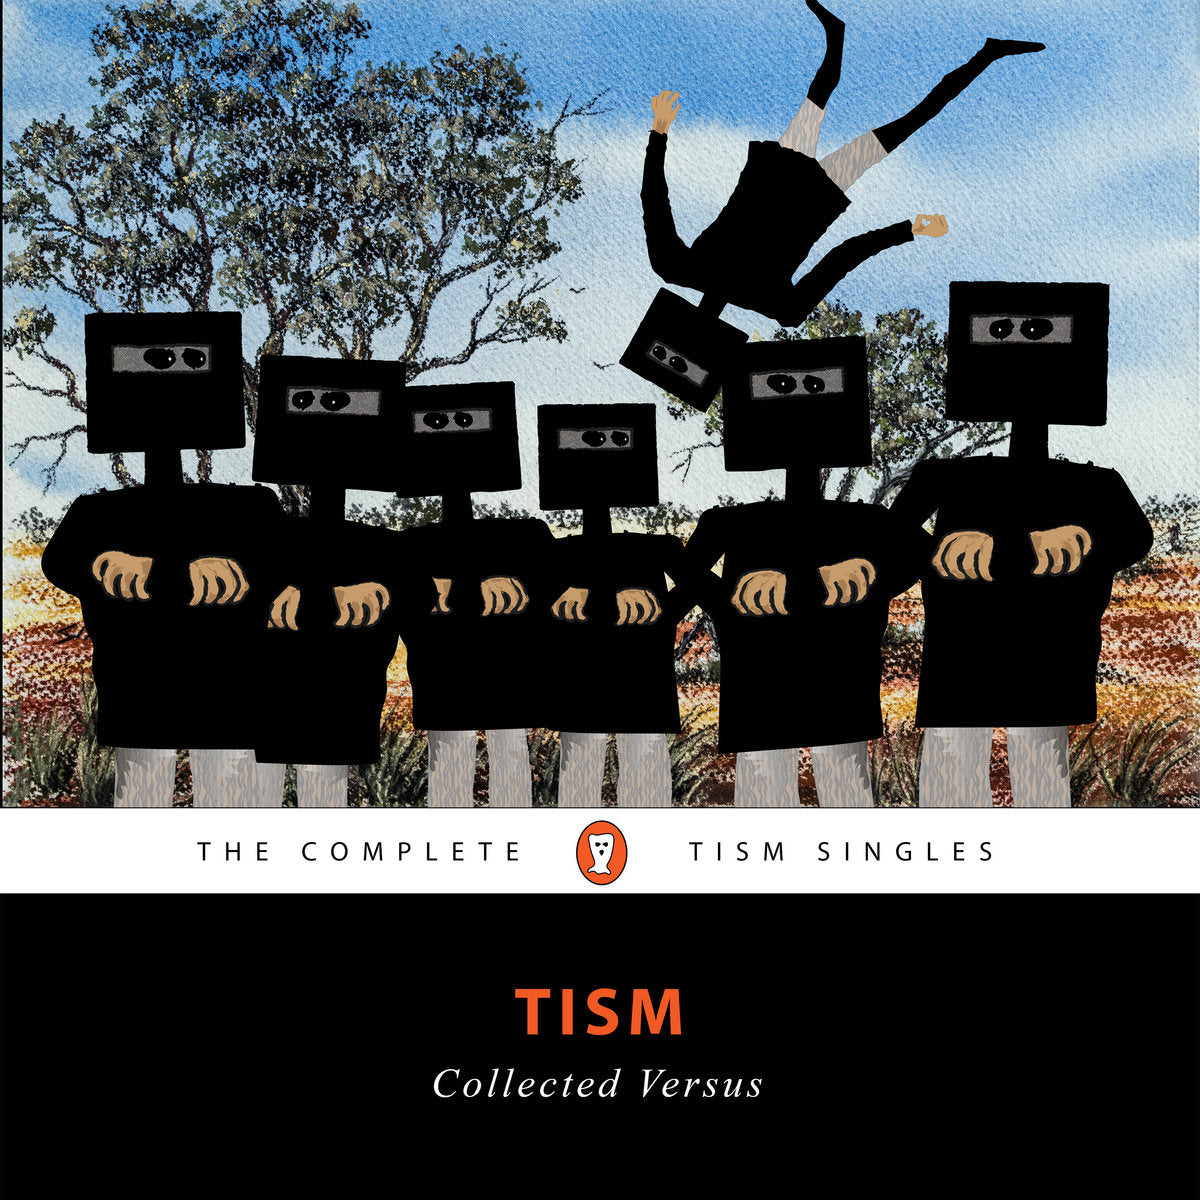 TISM - Collected Versus: The Complete TISM Singles (2CD) - CD - New